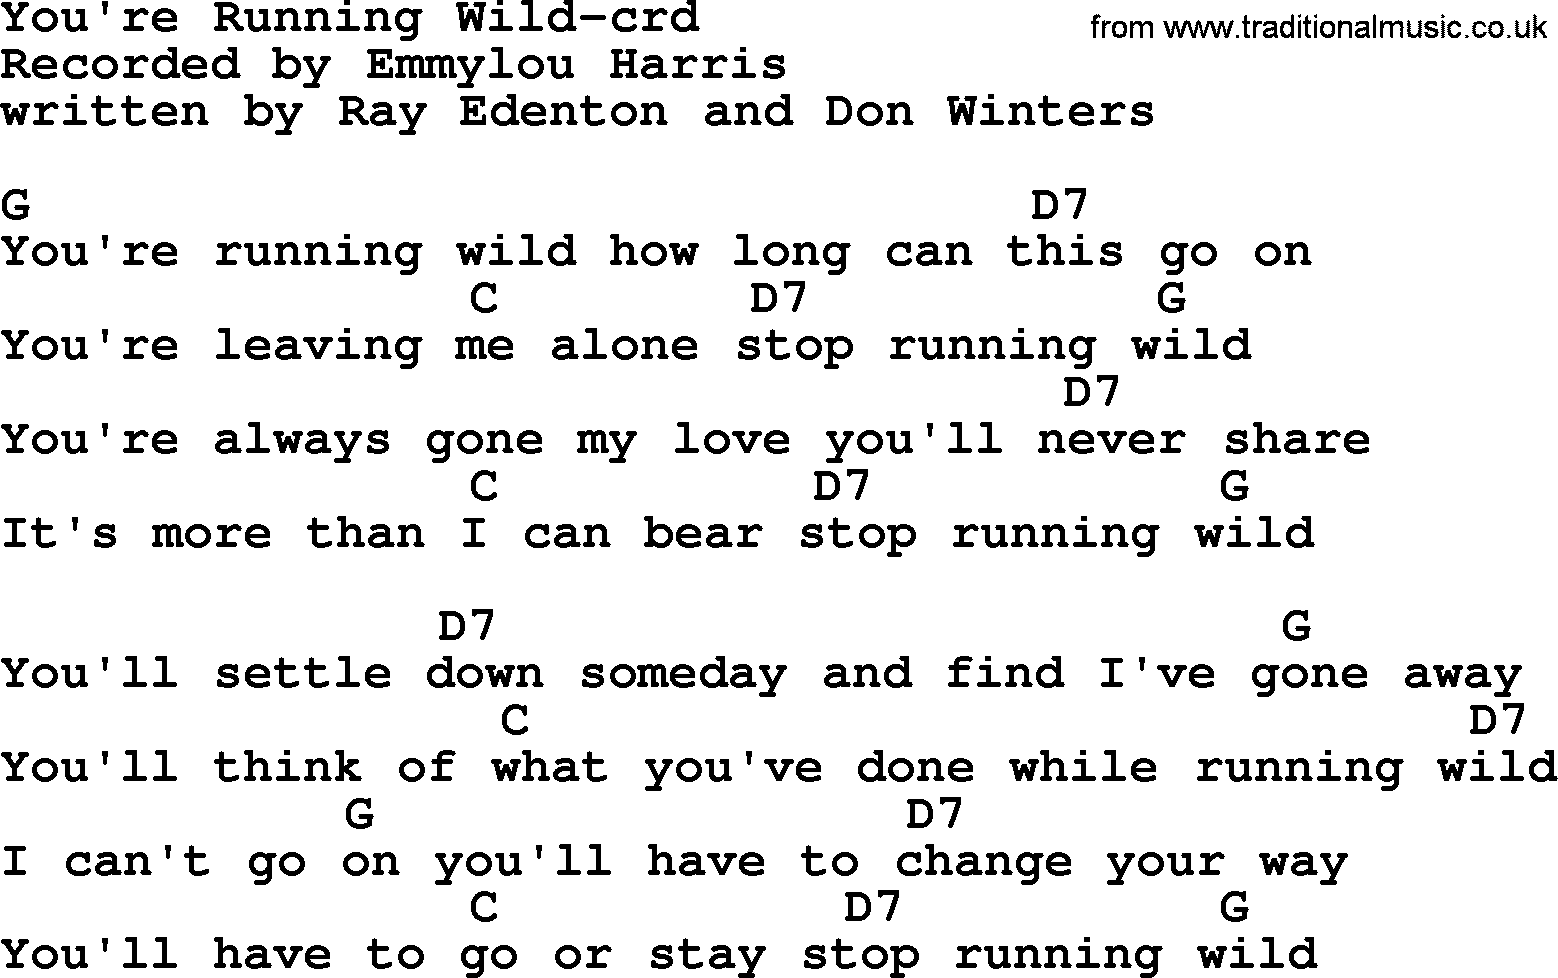 Emmylou Harris song: You're Running Wild lyrics and chords